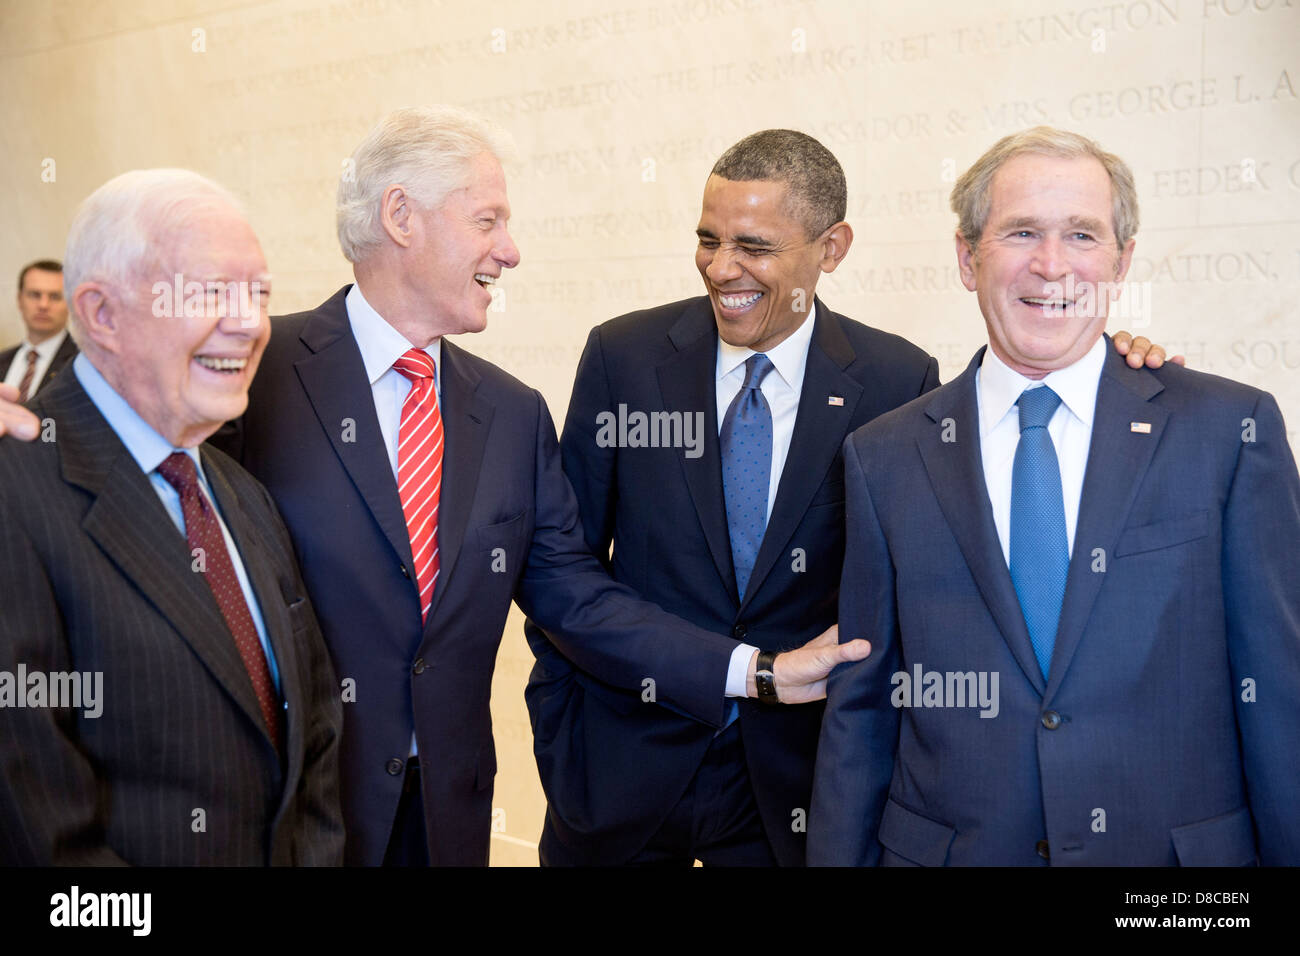 US President Barack Obama laughs with former Presidents Jimmy Carter, Bill Clinton, and George W. Bush, prior to the dedication of the George W. Bush Presidential Library and Museum on the campus of Southern Methodist University April 25, 2013 in Dallas, Texas. Stock Photo